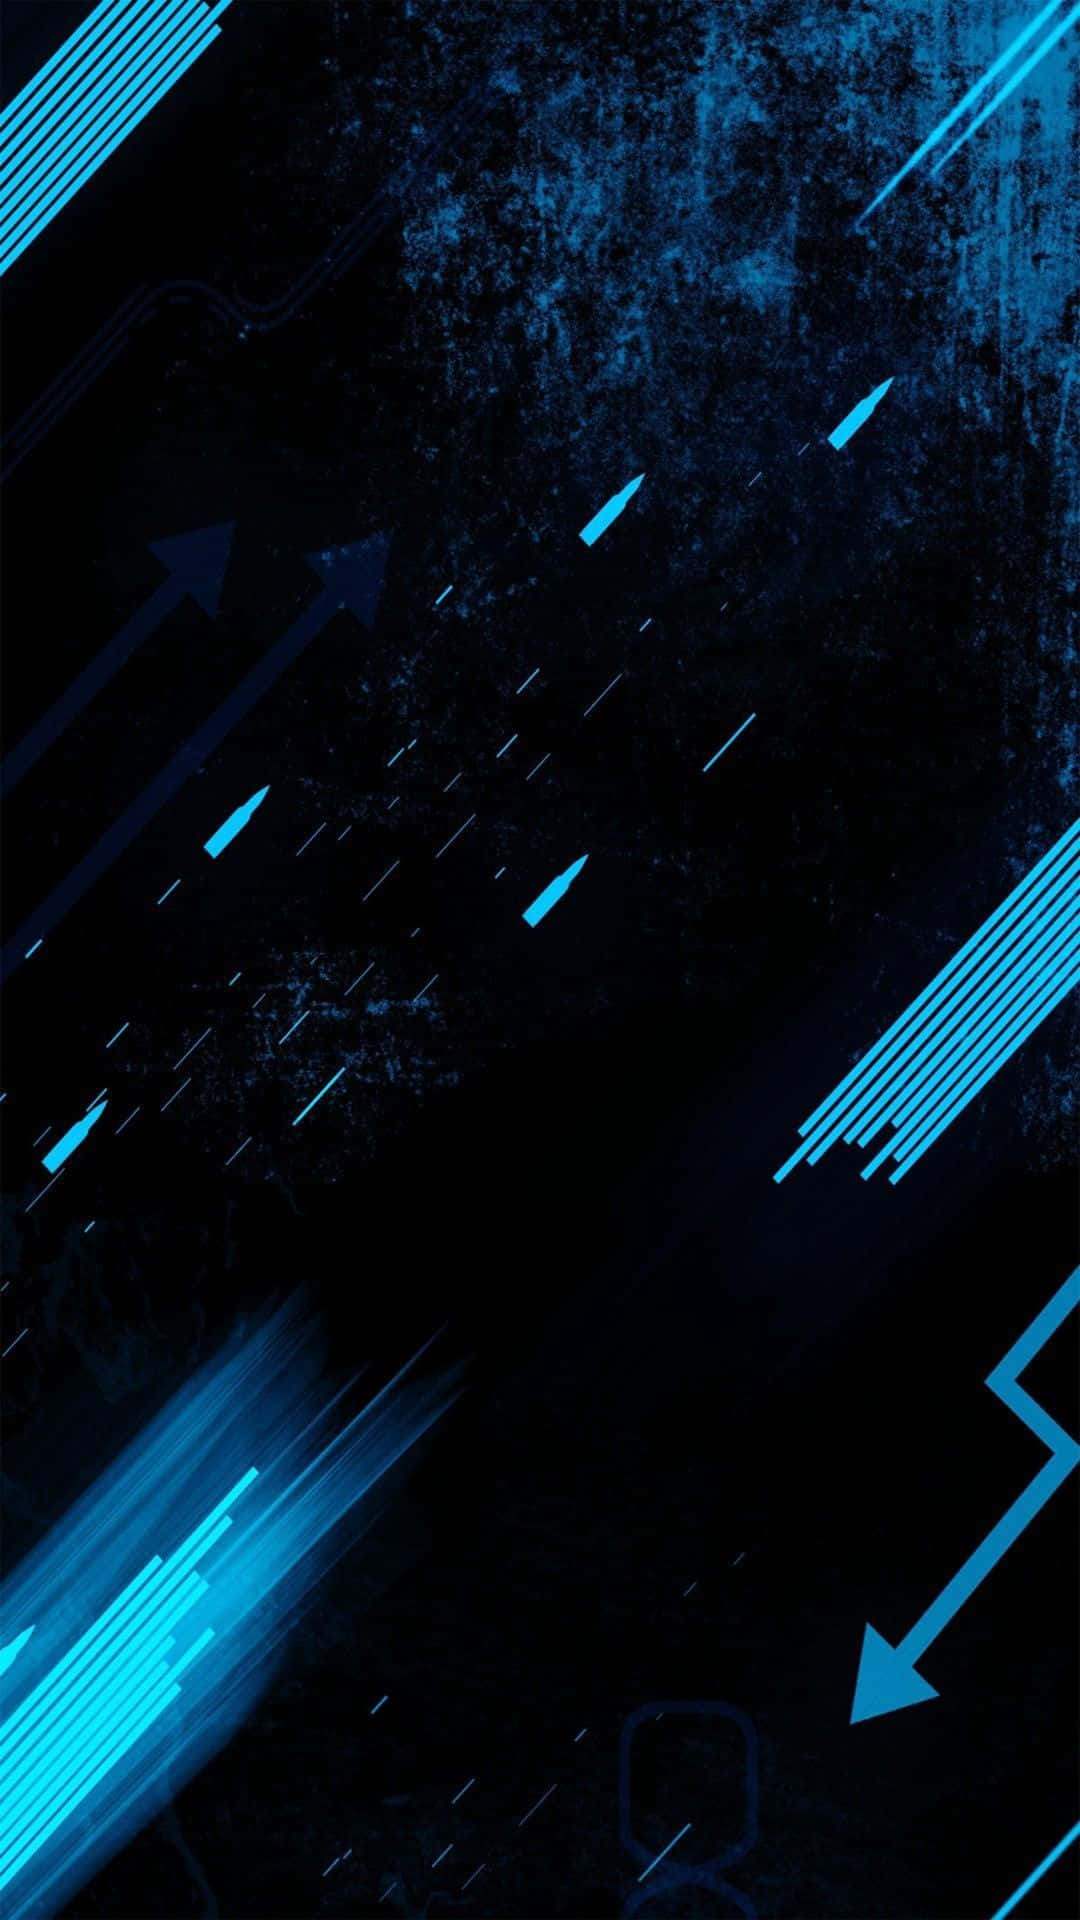 Enjoy the tranquil beauty of the Blue Amoled. Wallpaper